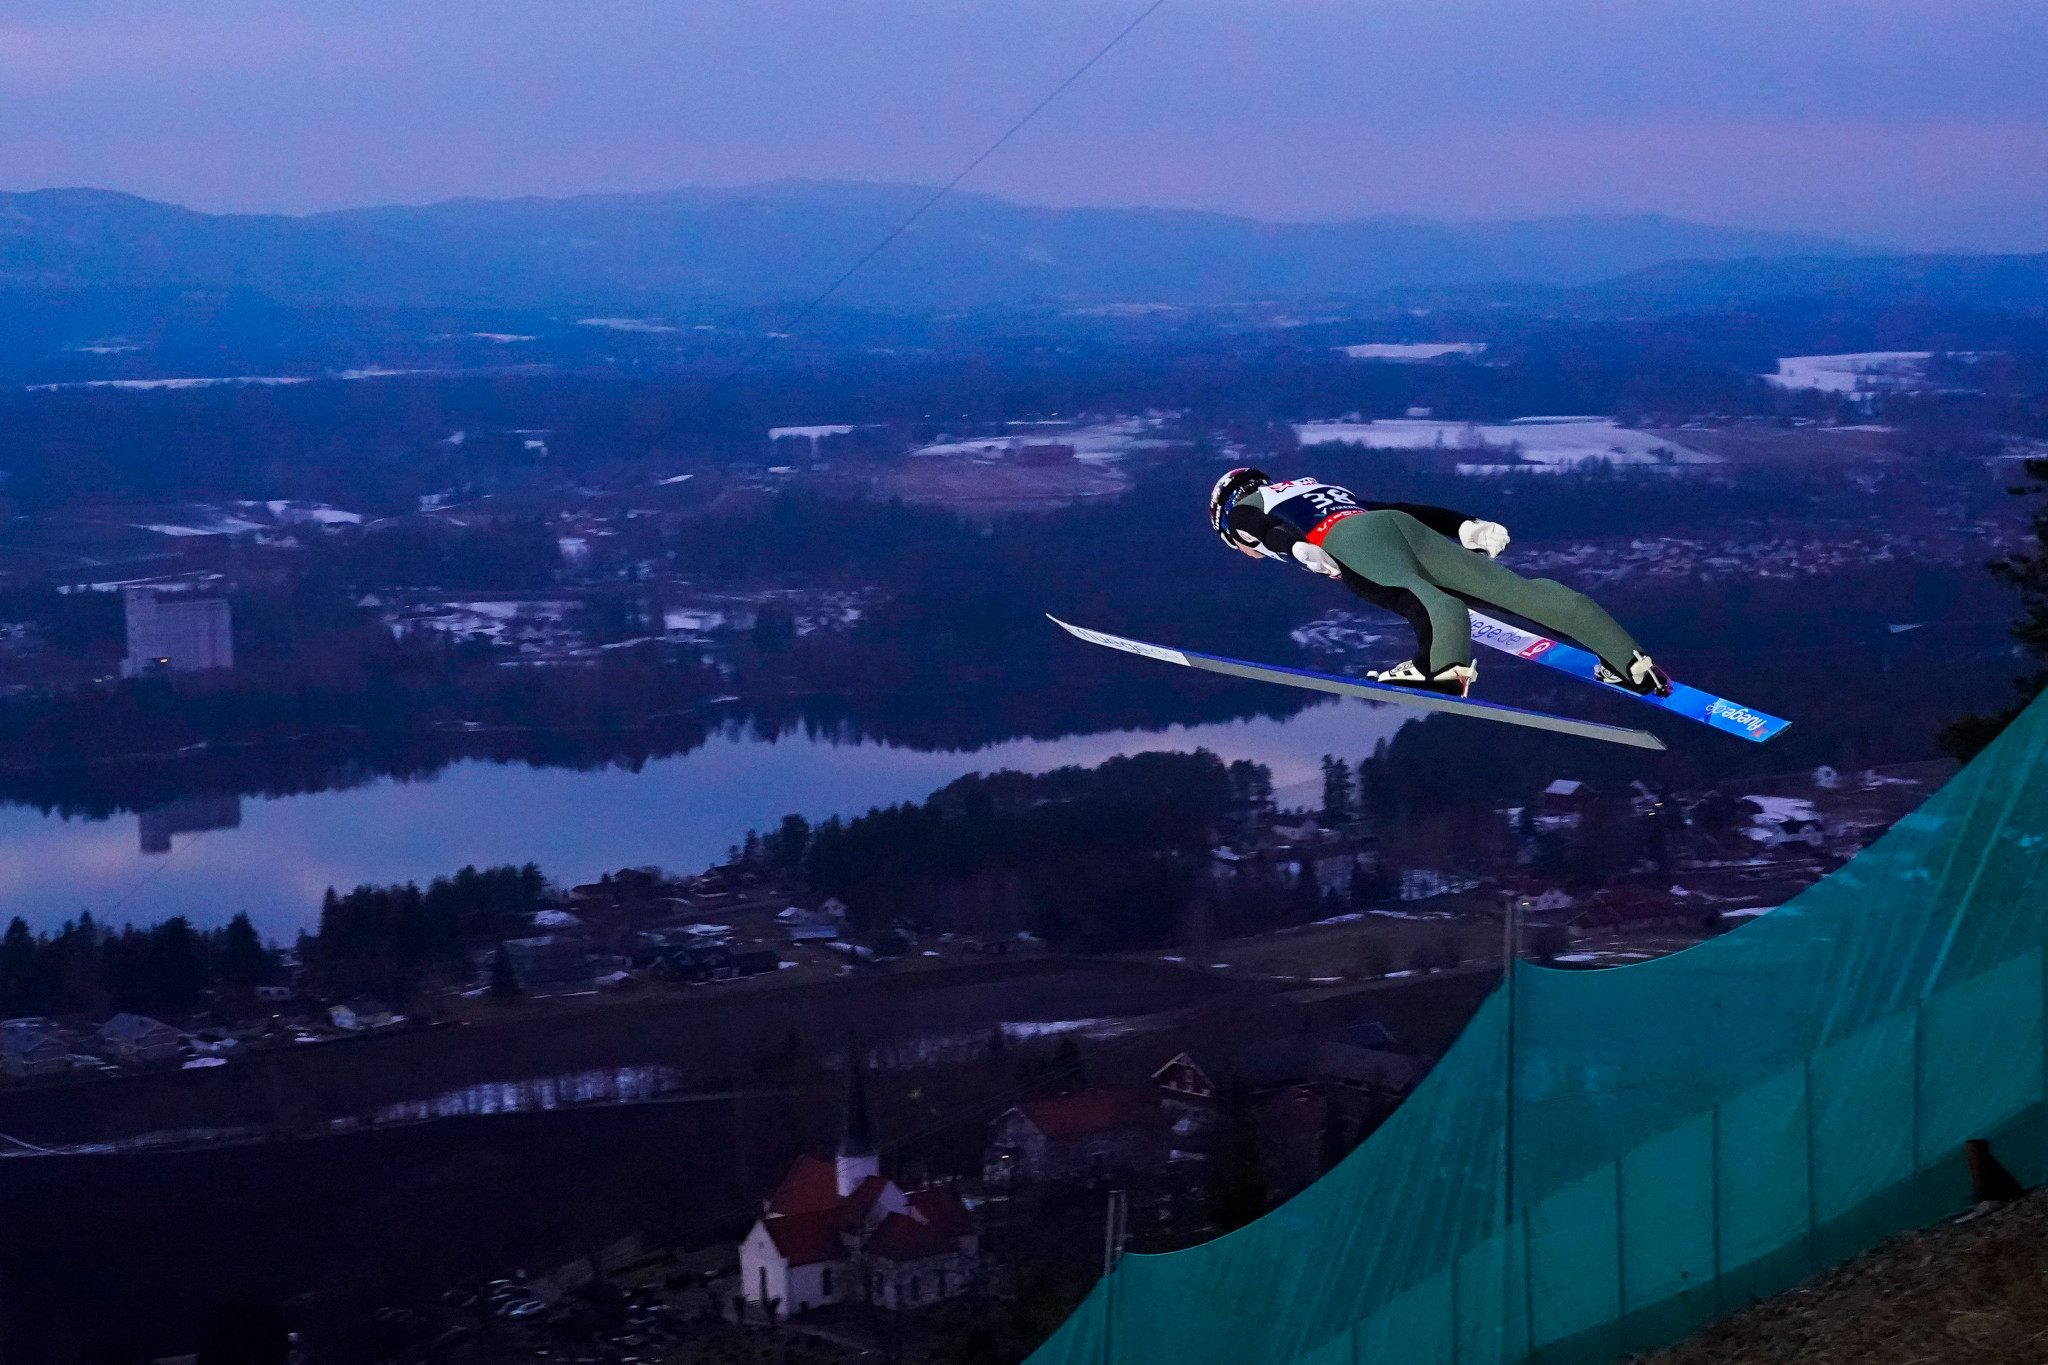 Vikersund will host a women's ski flying event next season ©Getty Images